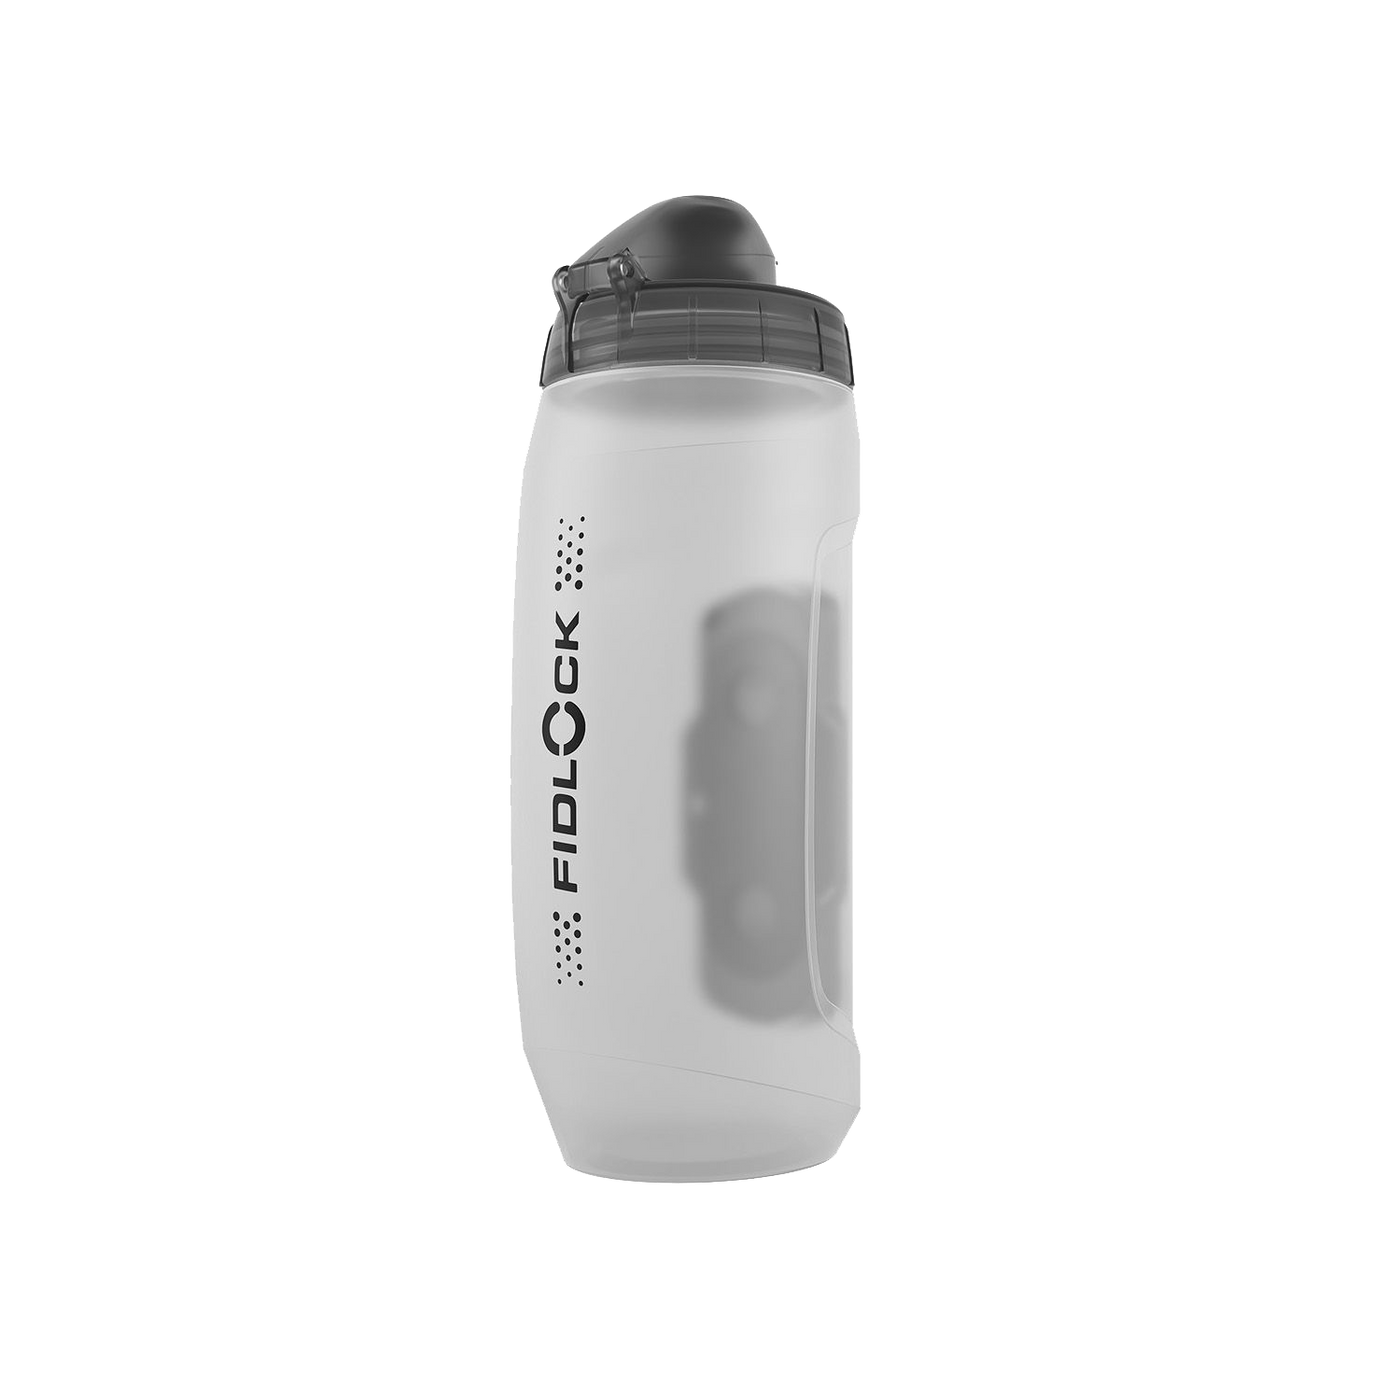 FIDLOCK Replacement Bottle 590 Clear